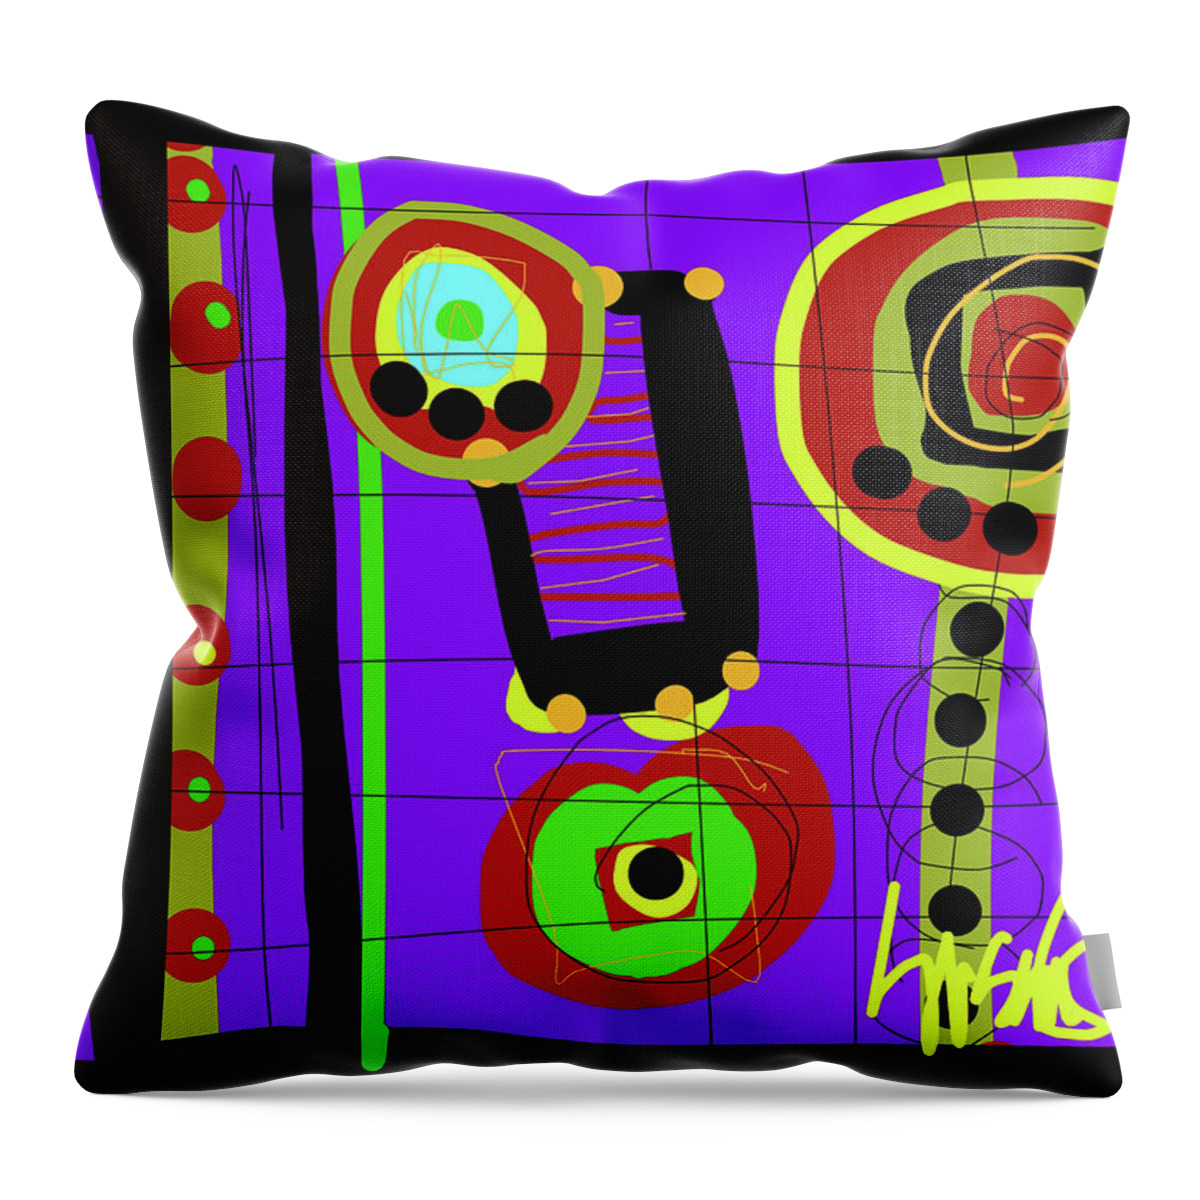 Count Basie Throw Pillow featuring the digital art The Blessed Man in memoriam of Count Basie by Susan Fielder